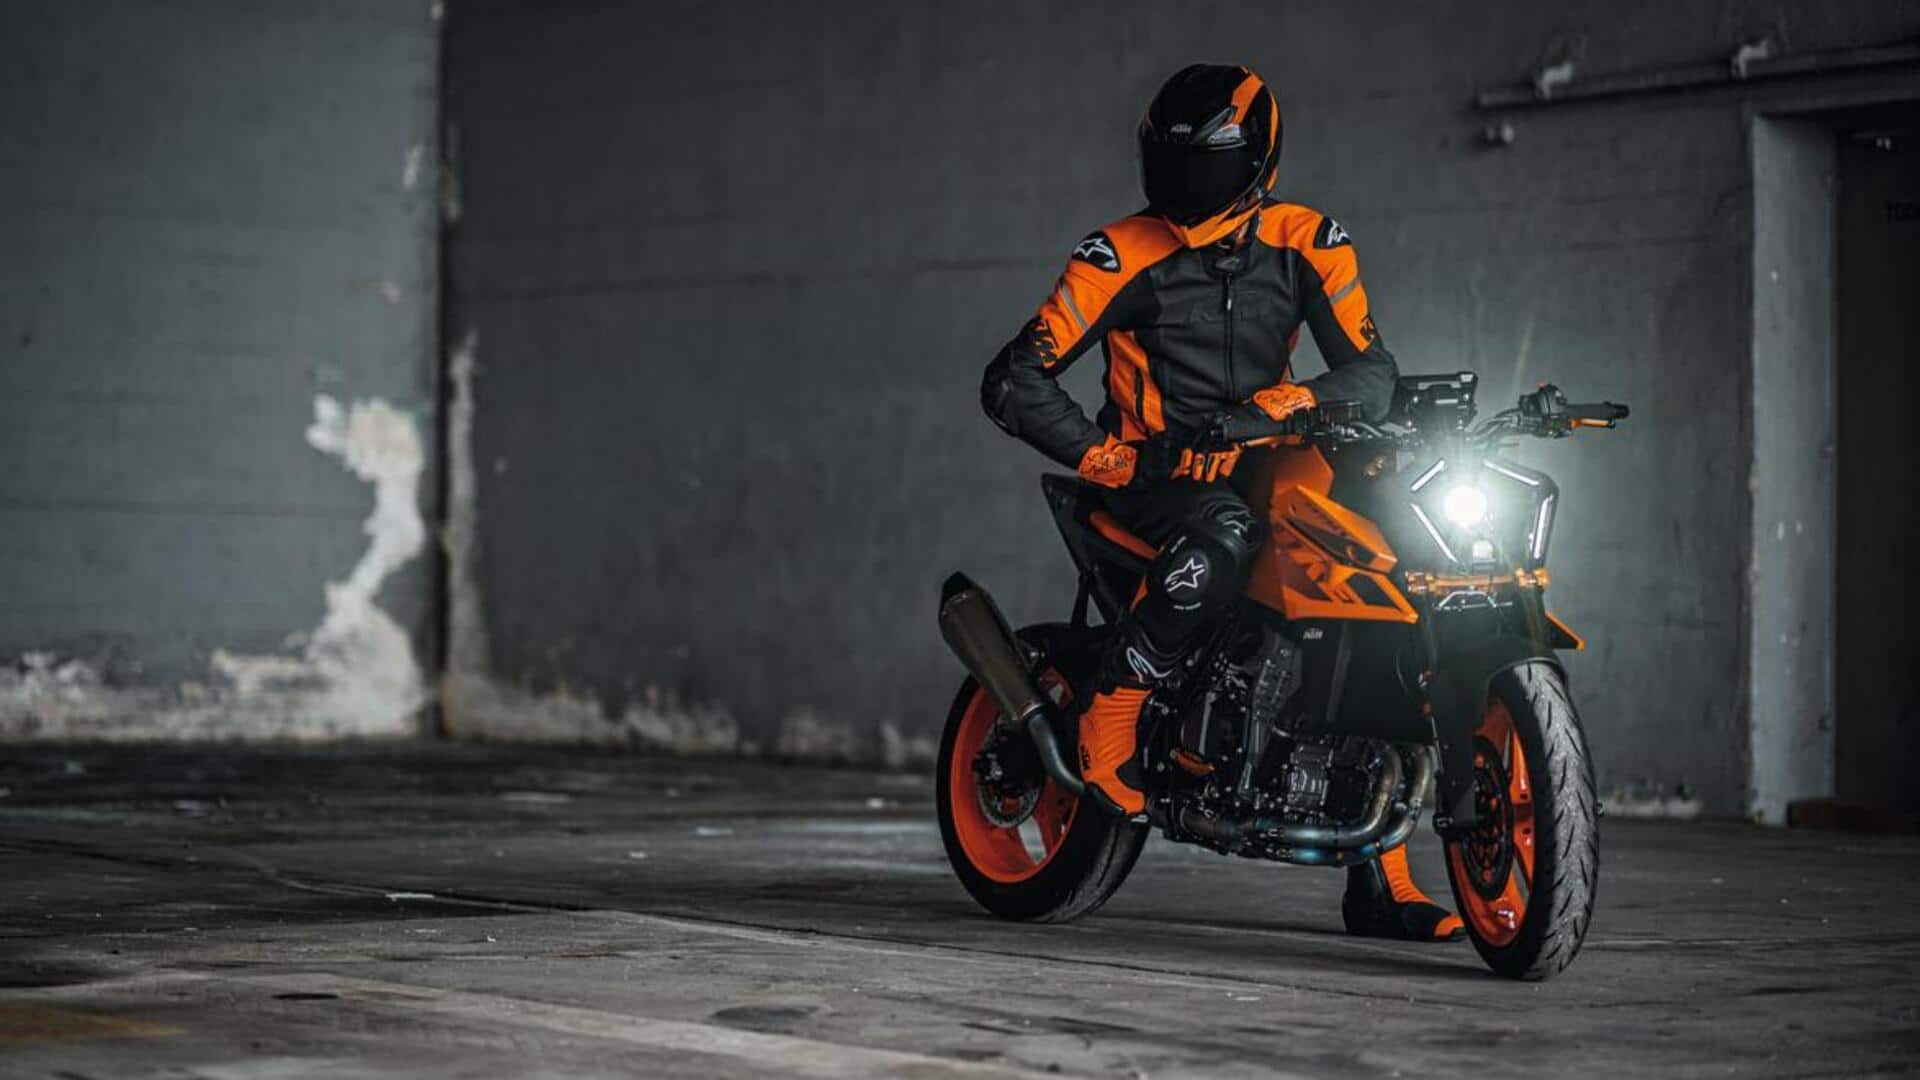 KTM reveals all-new 990 Duke at EICMA: Check best features